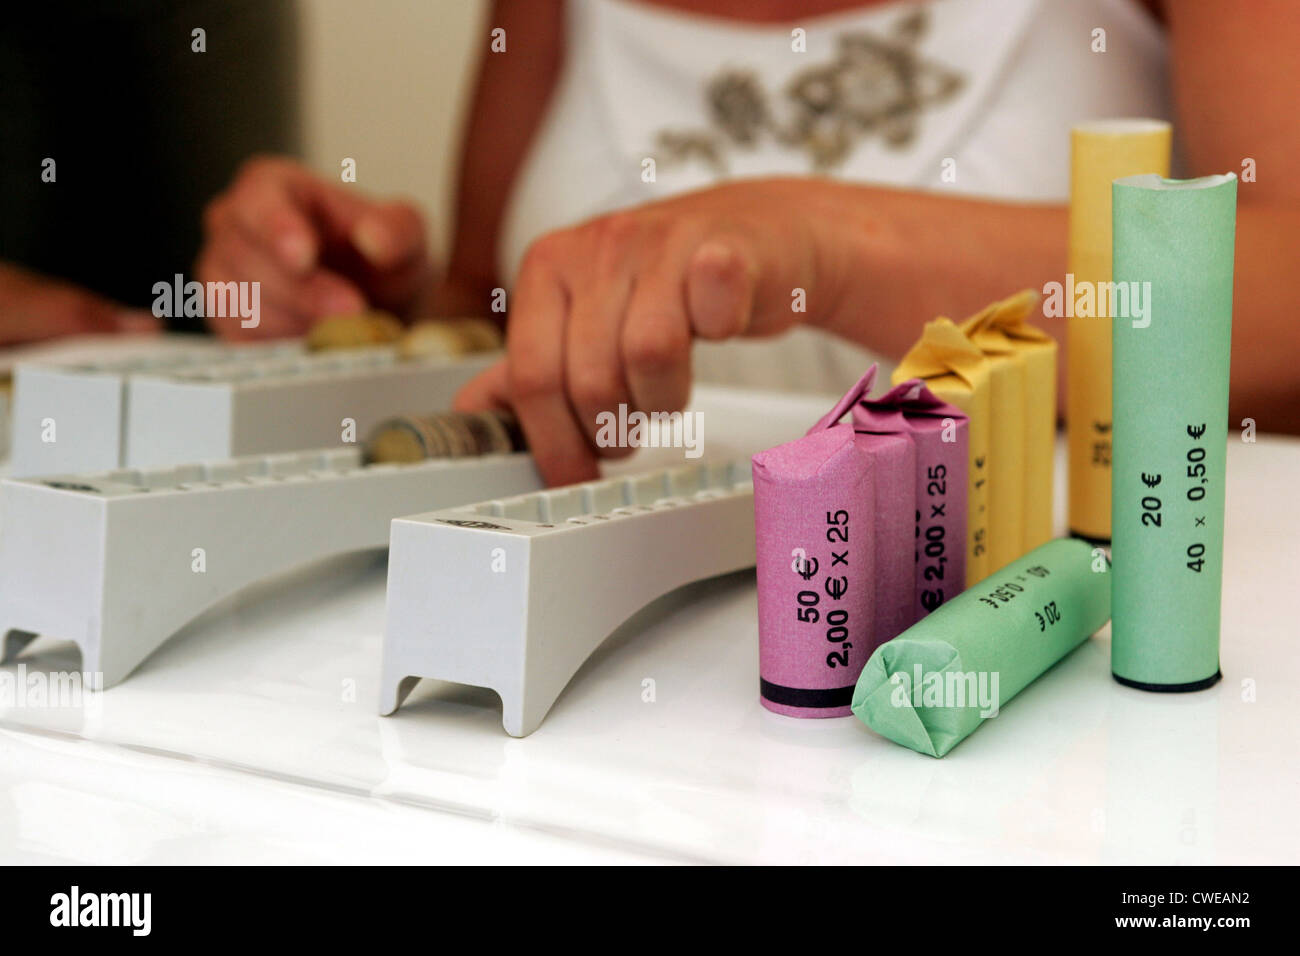 Bad Doberan, coins are counted and rolled Stock Photo